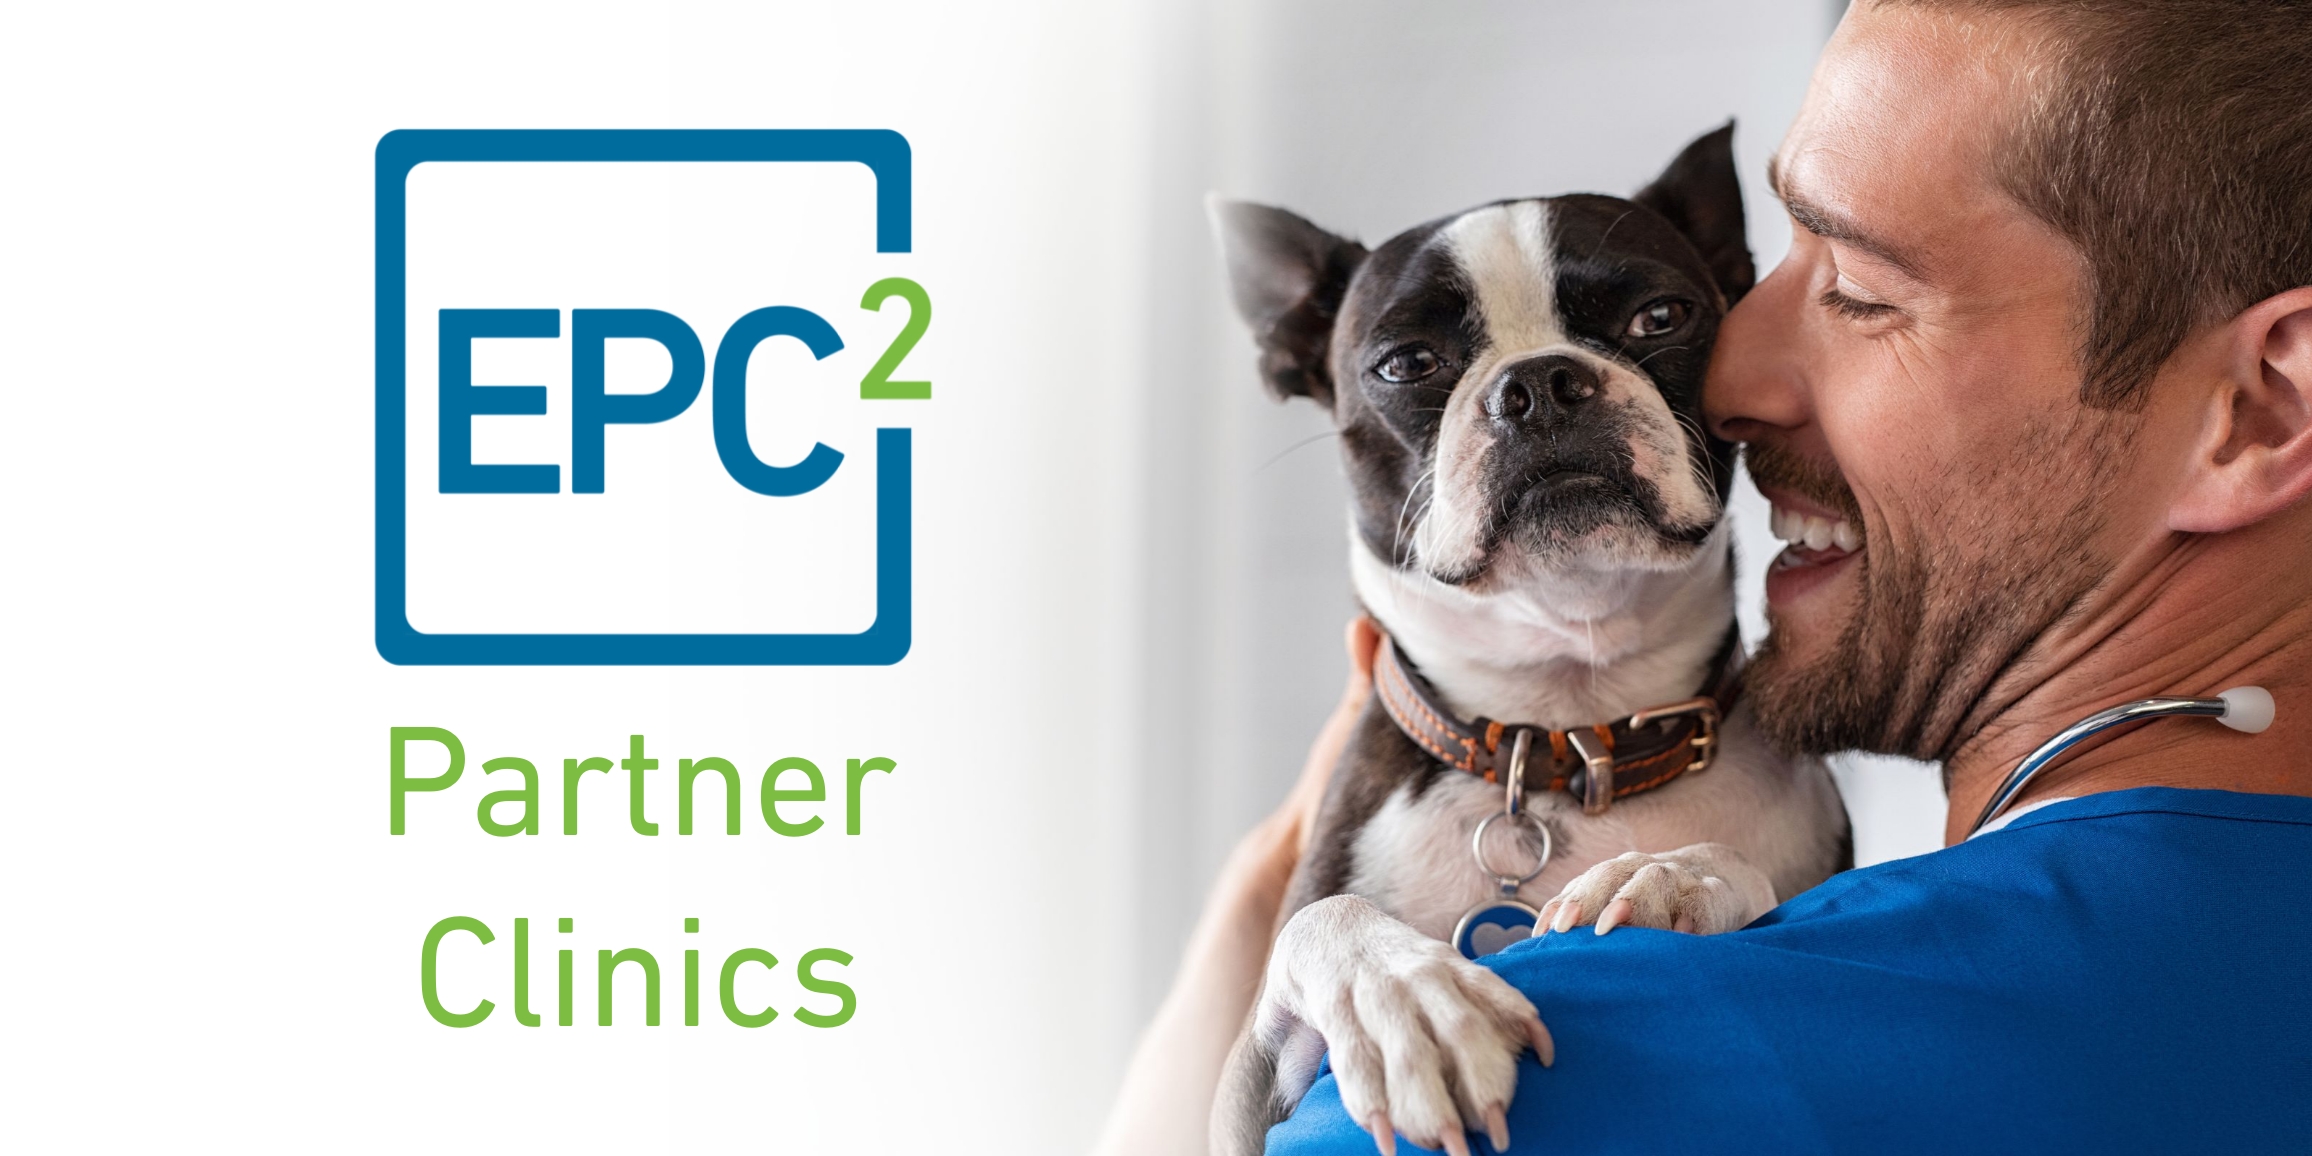 Essentials PetCare Unveils EPC² Partner Clinics for Veterinary Hospitals and DVMs at VMX 2022 in Orlando